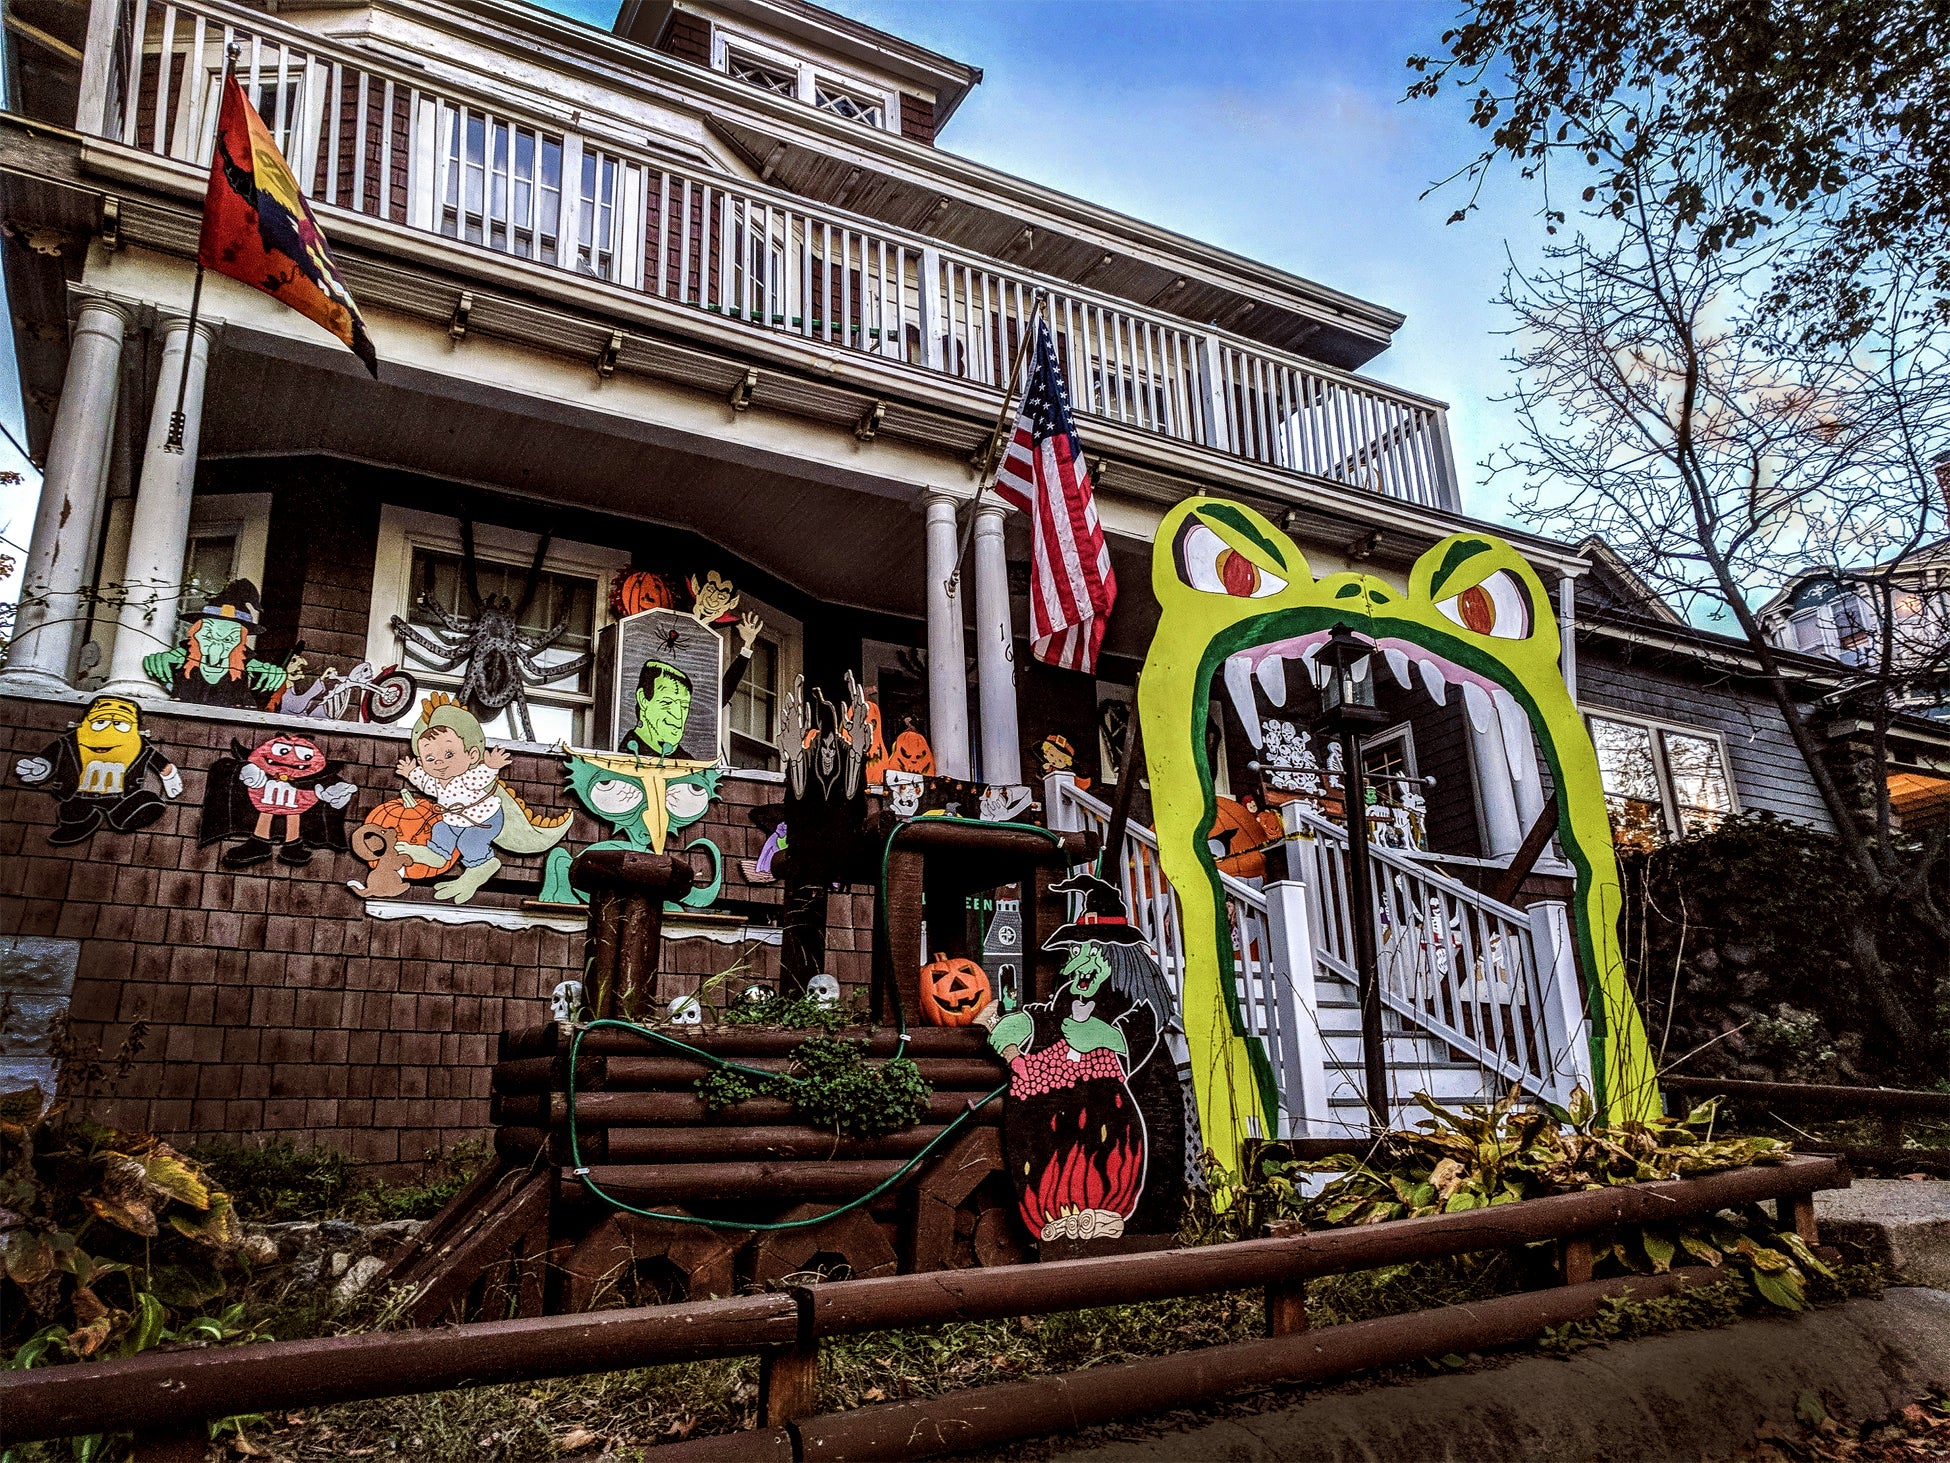 7 spots that are fullon decked out in Halloween decorations this month